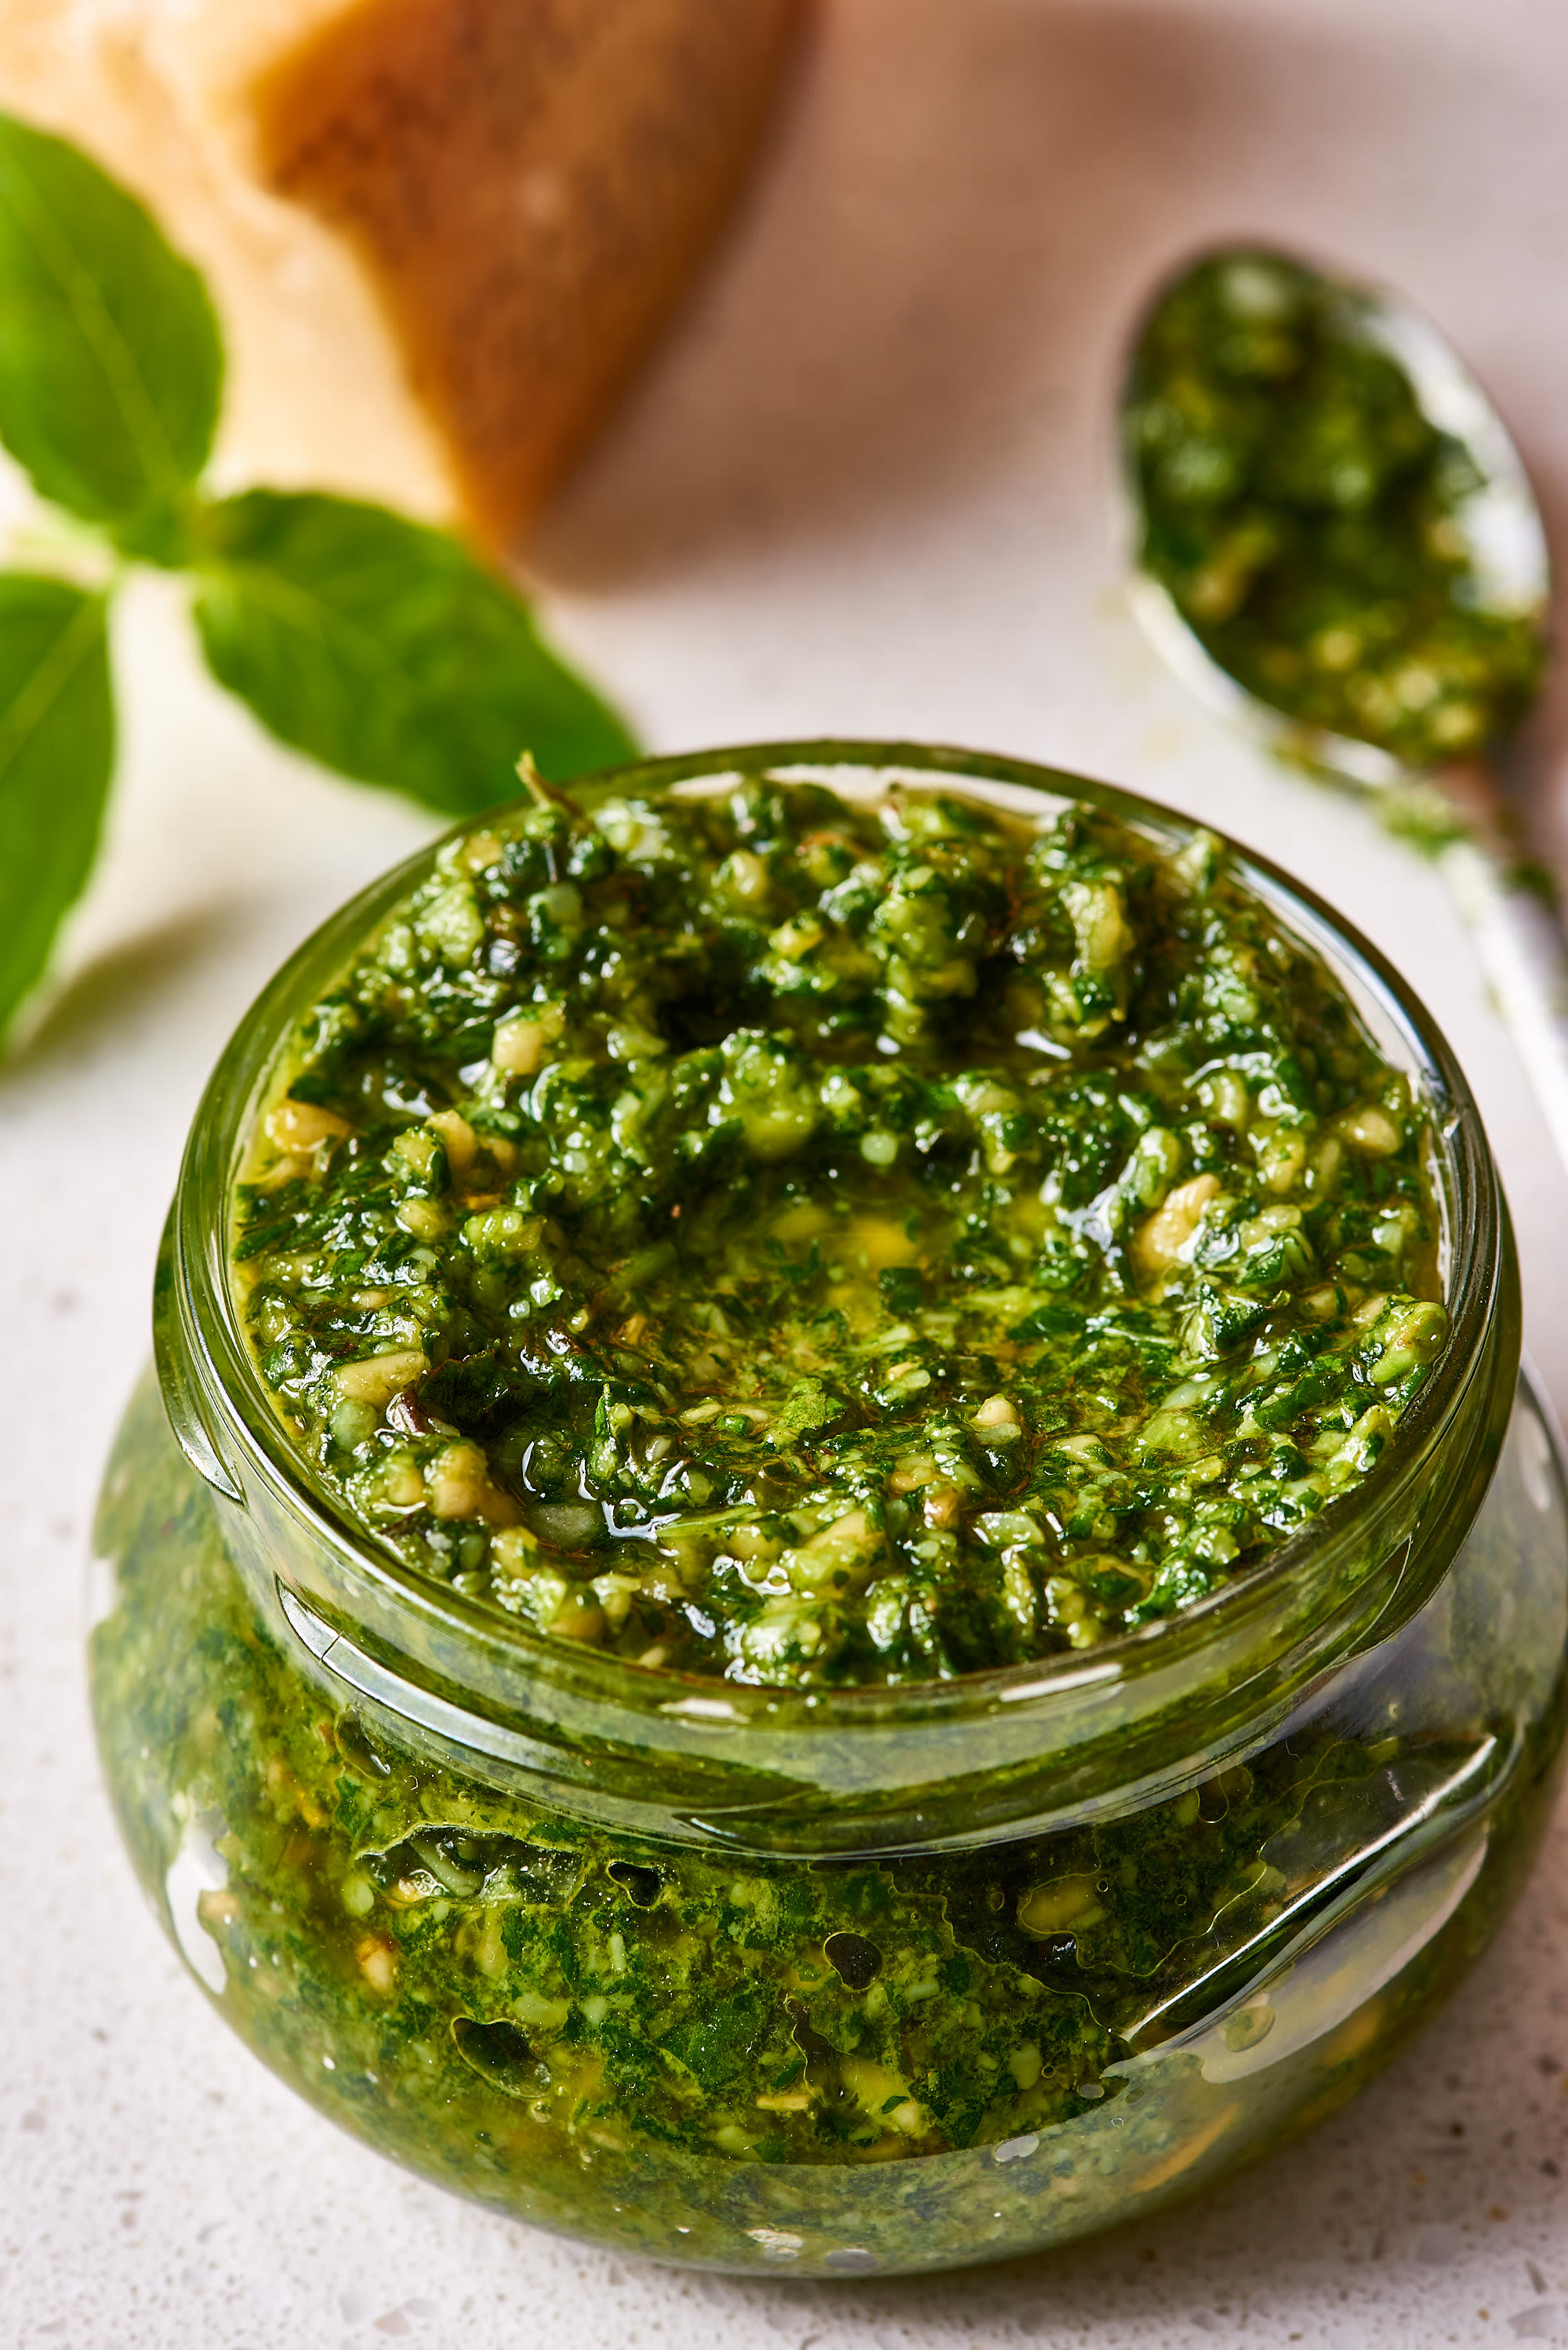 Easy Pesto in the KitchenAid 3.5 cup food processor. We call it a